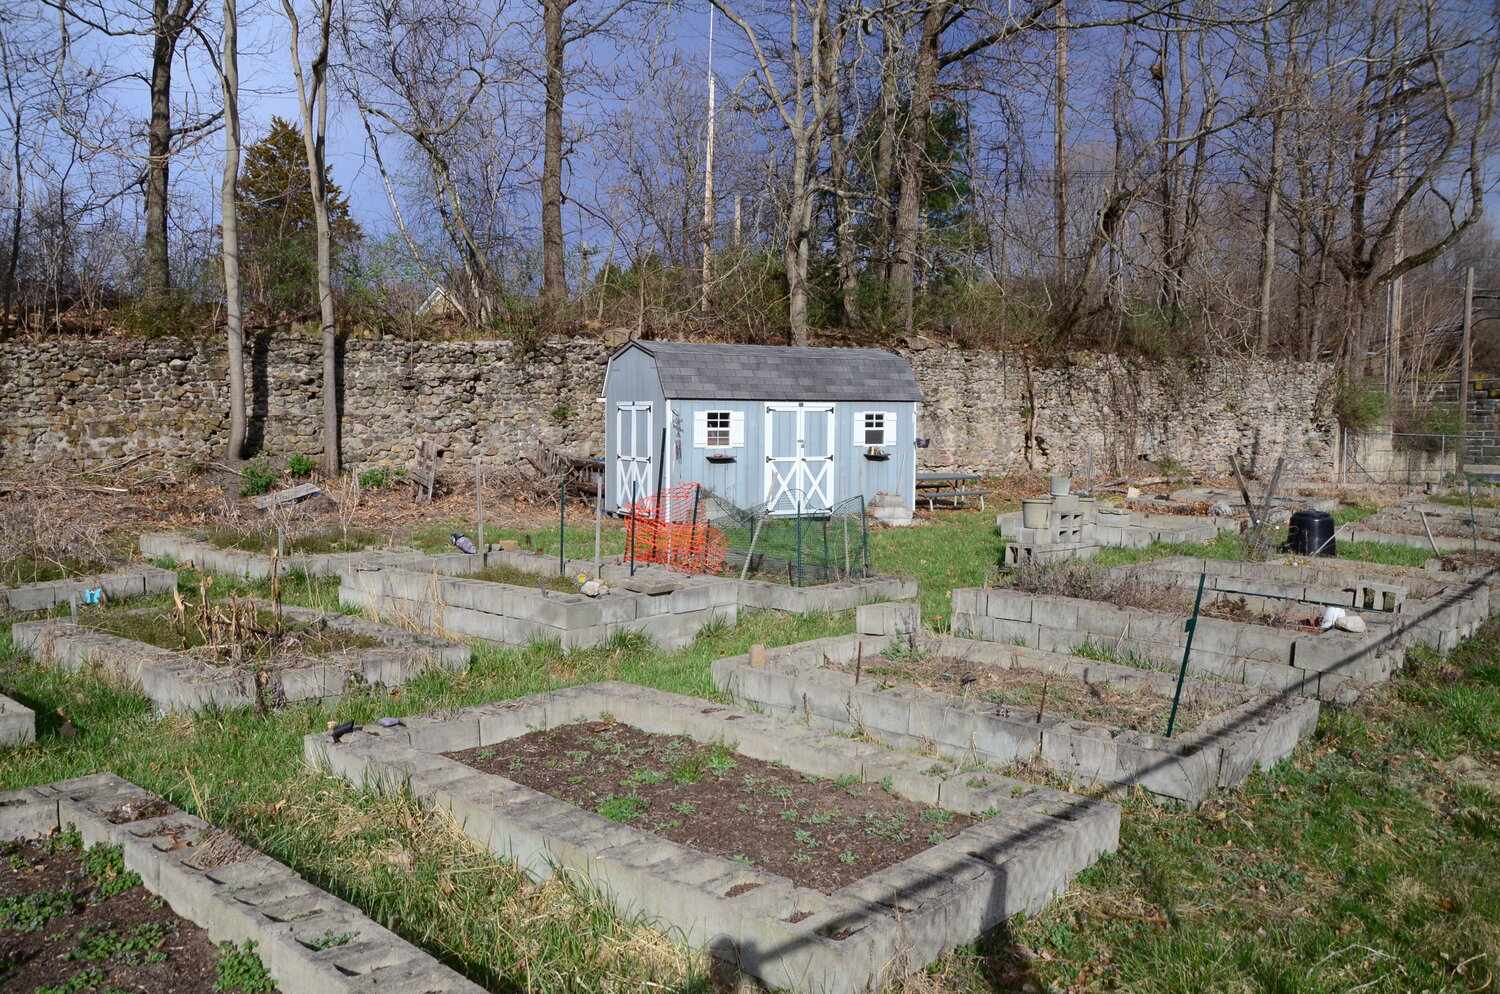 In Port Jervis, a community garden space exists on North Street, with raised beds efficiently constructed from cinder blocks.